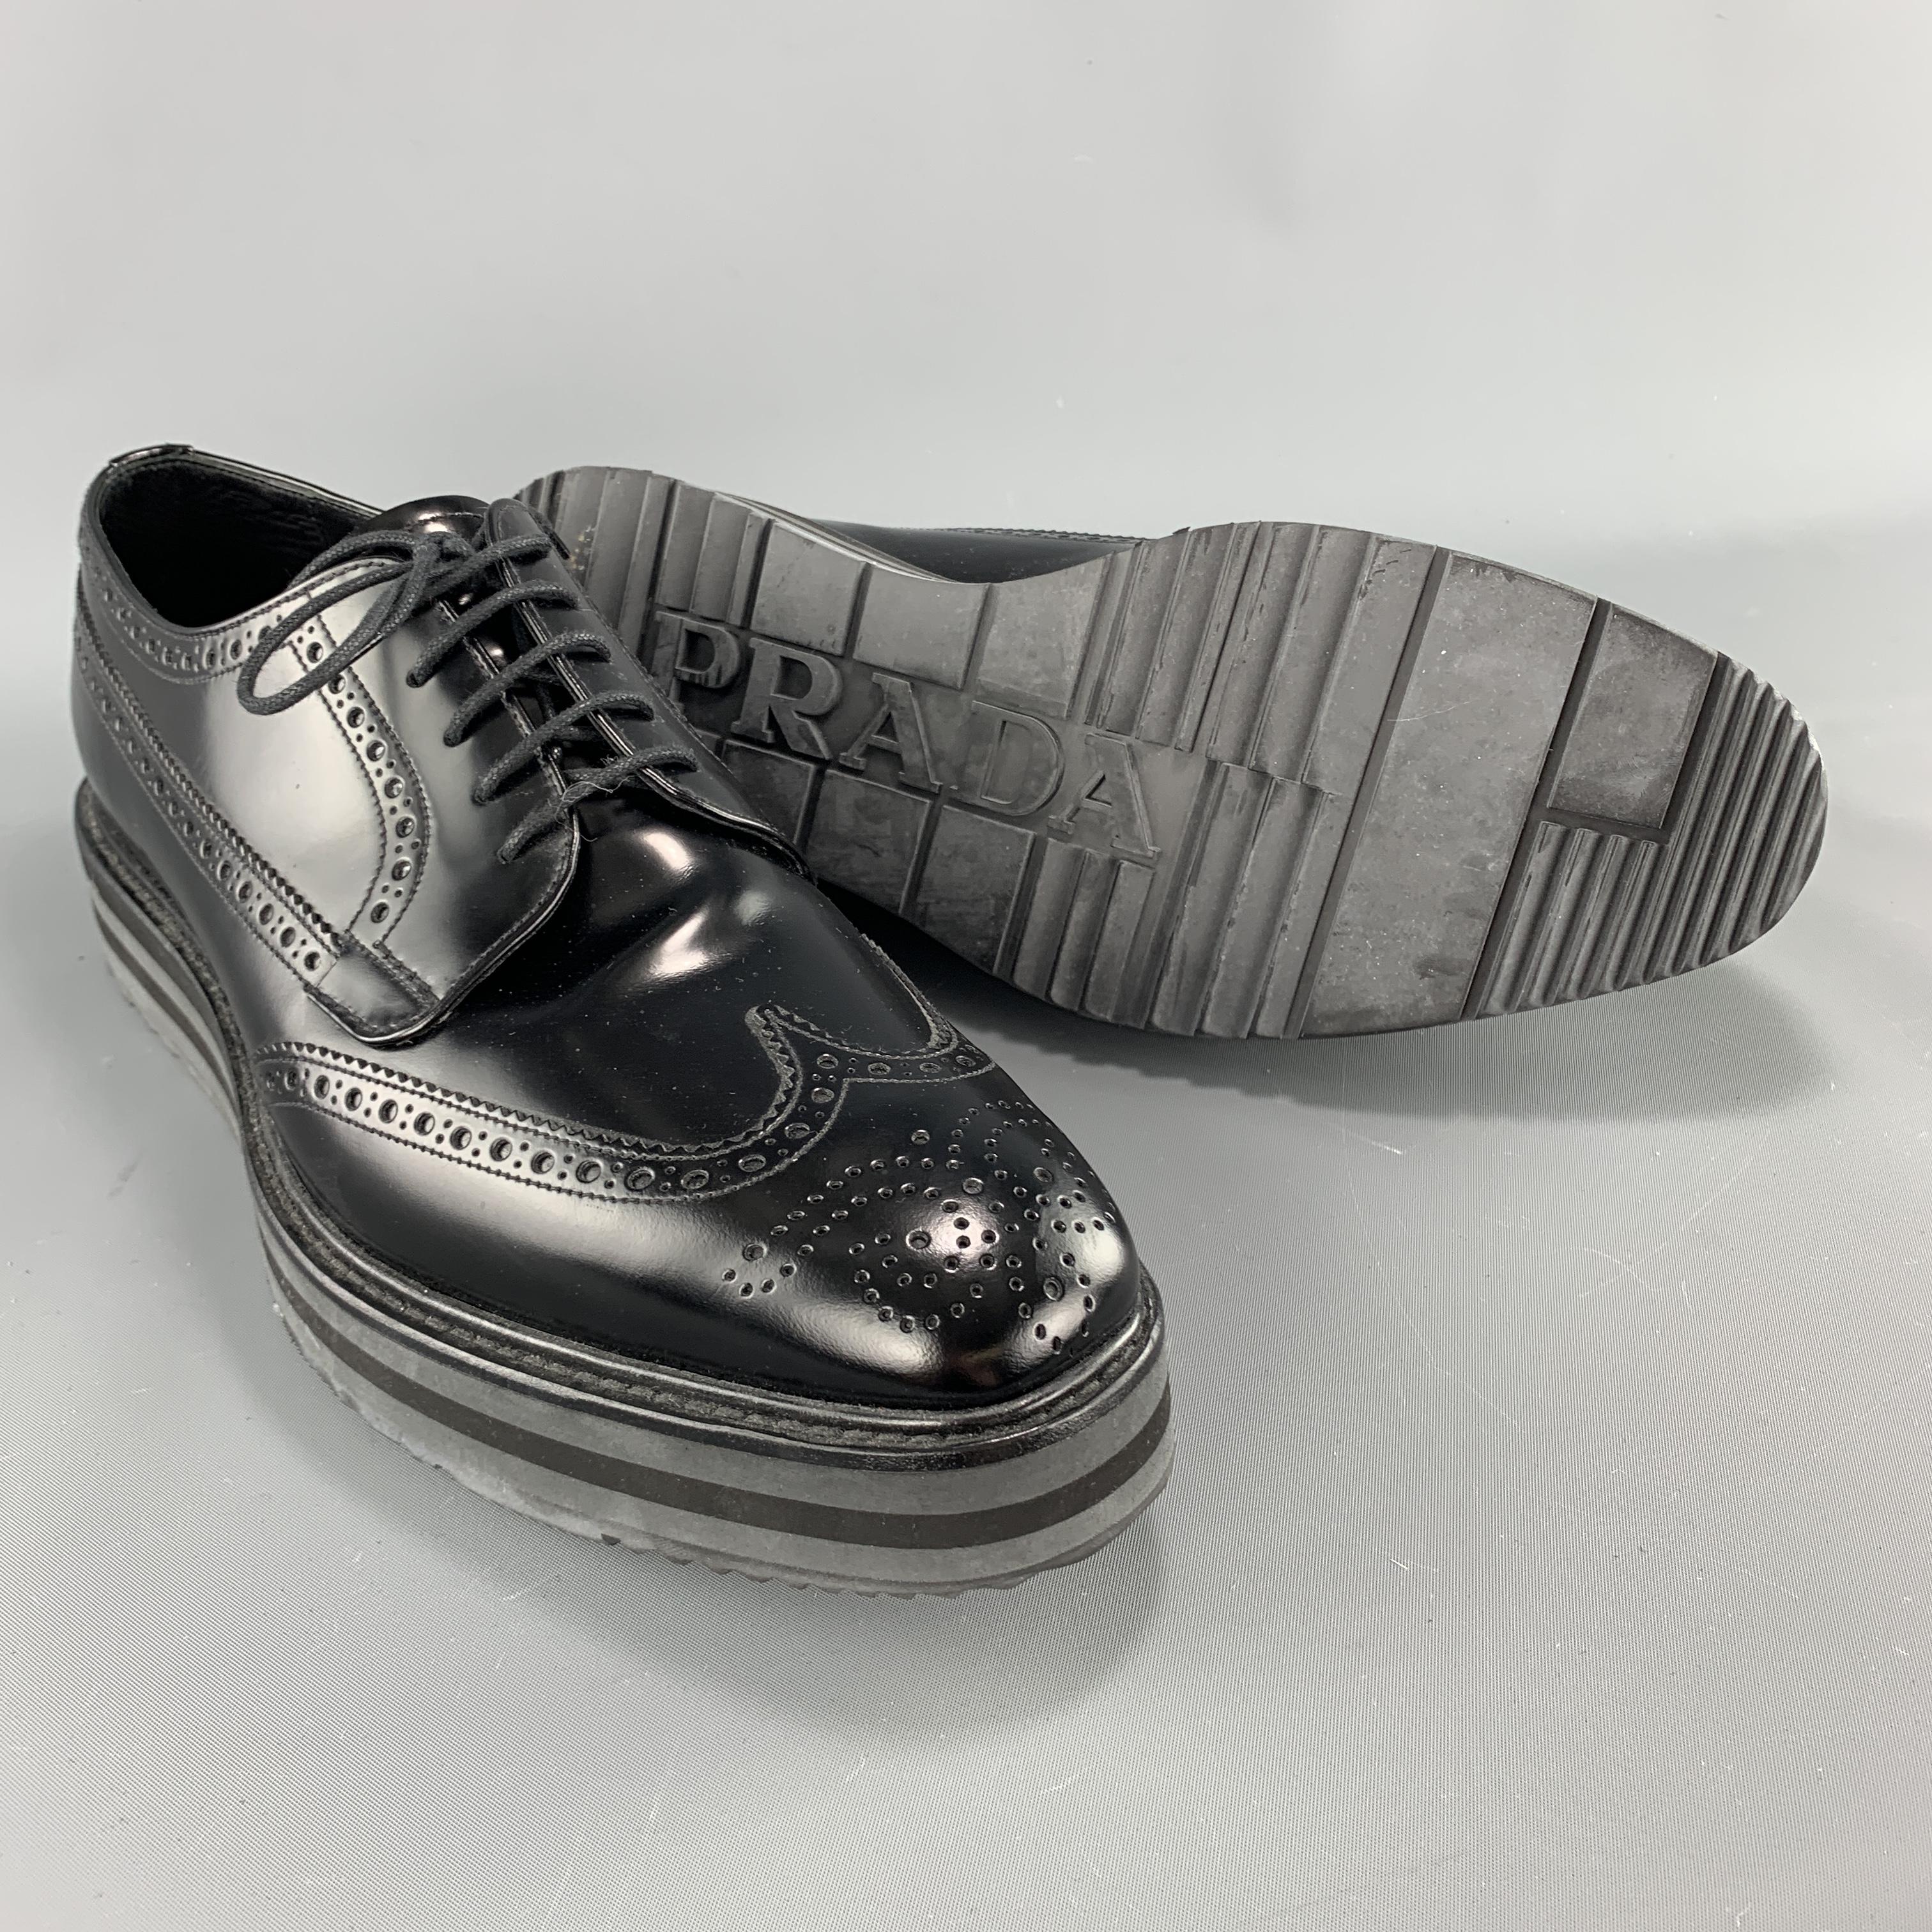 Black Iconic Spring Summer 2011 Collection PRADA brogues come in burgundy and tan brow